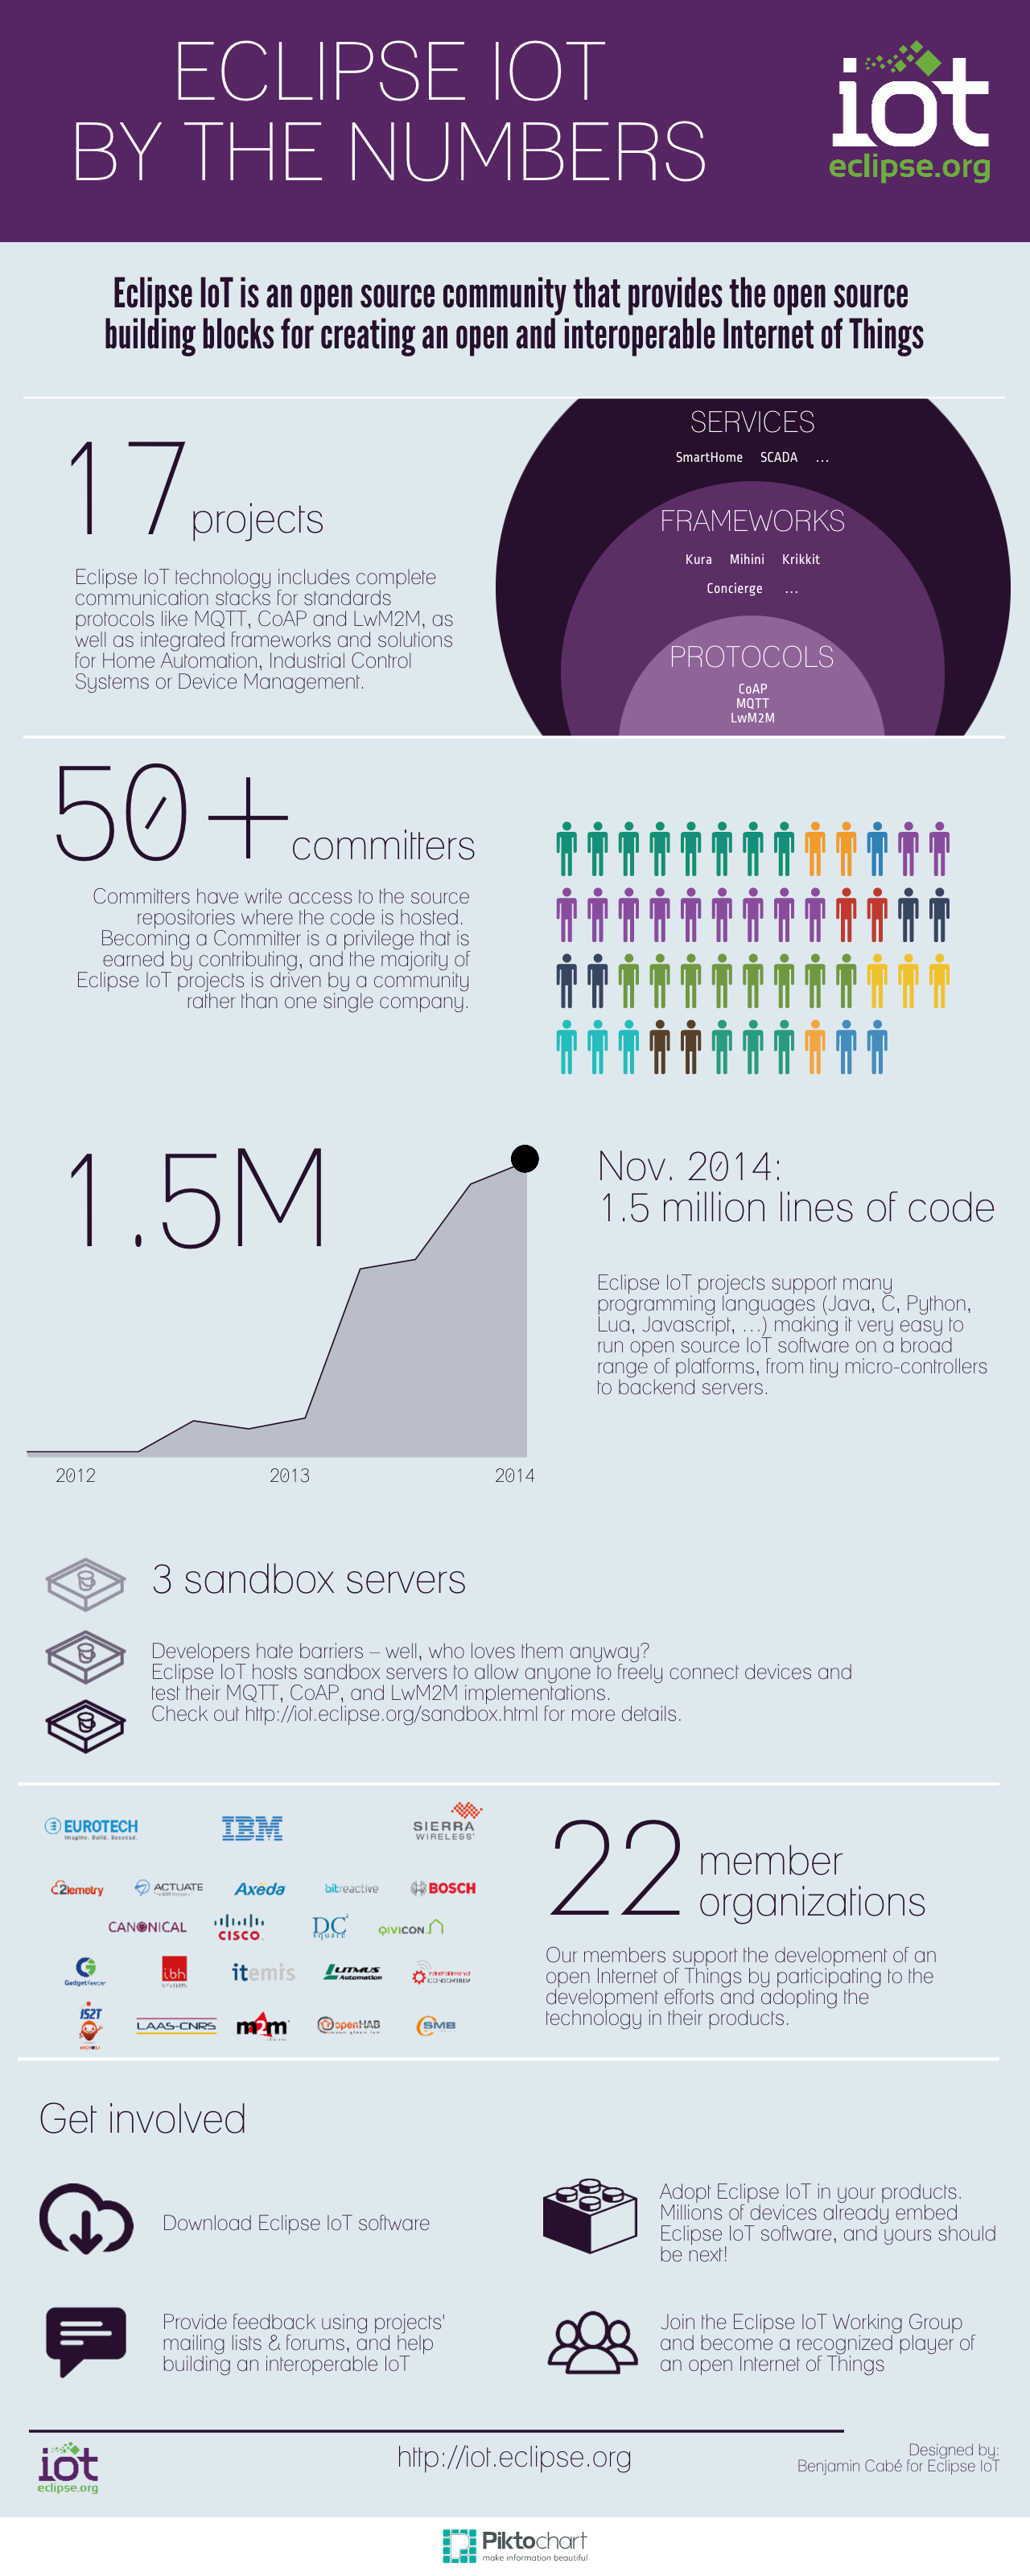 Eclipse IoT by the numbers